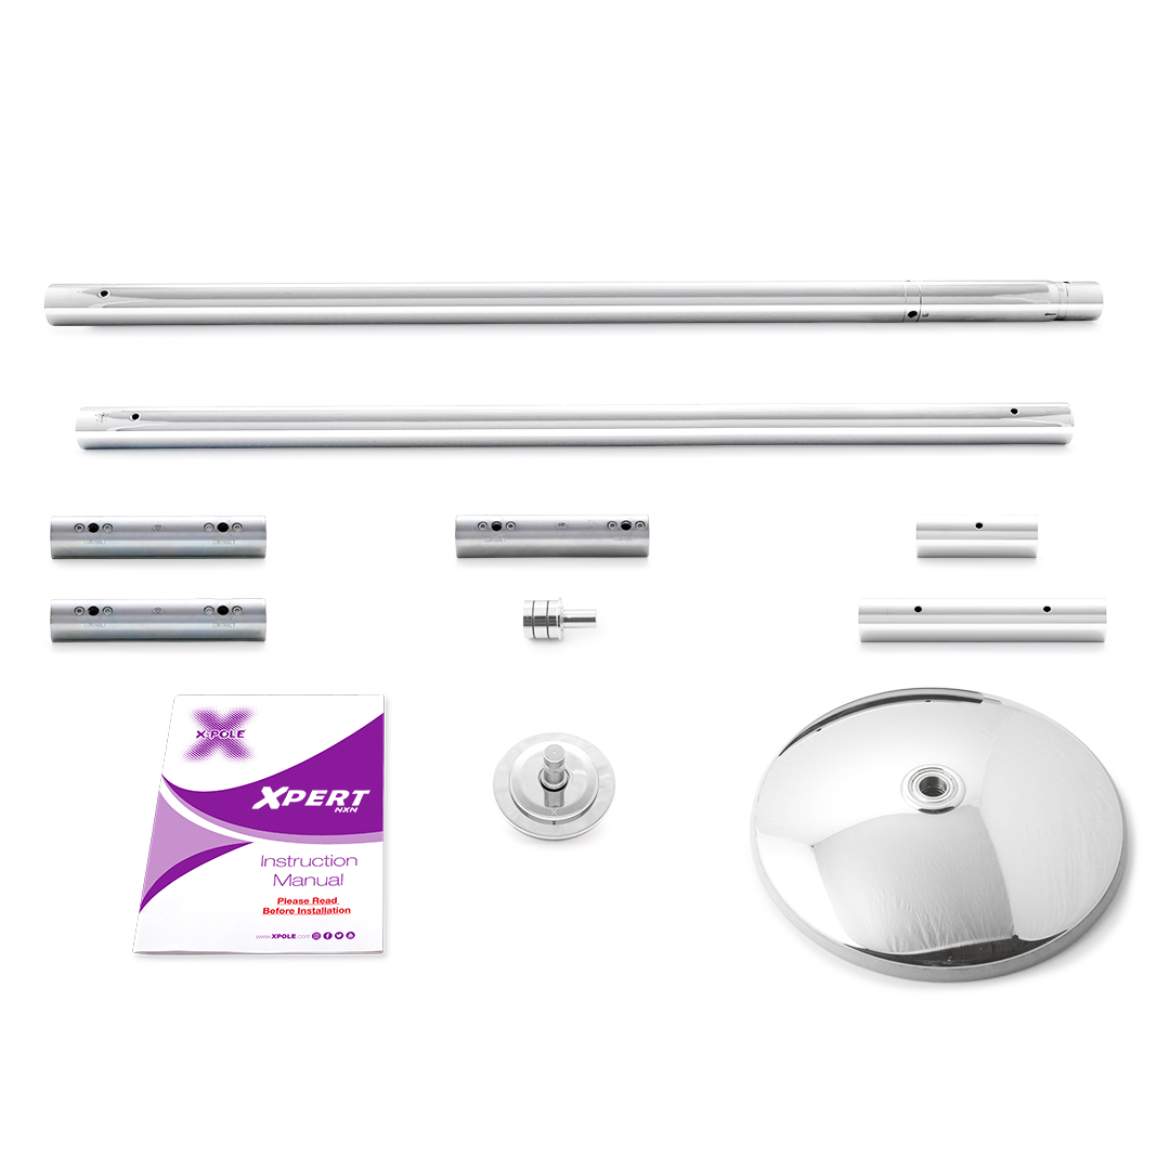 Poledance Dance Pole Standard Set Stainless Steel XPert Set for Home by X-Pole